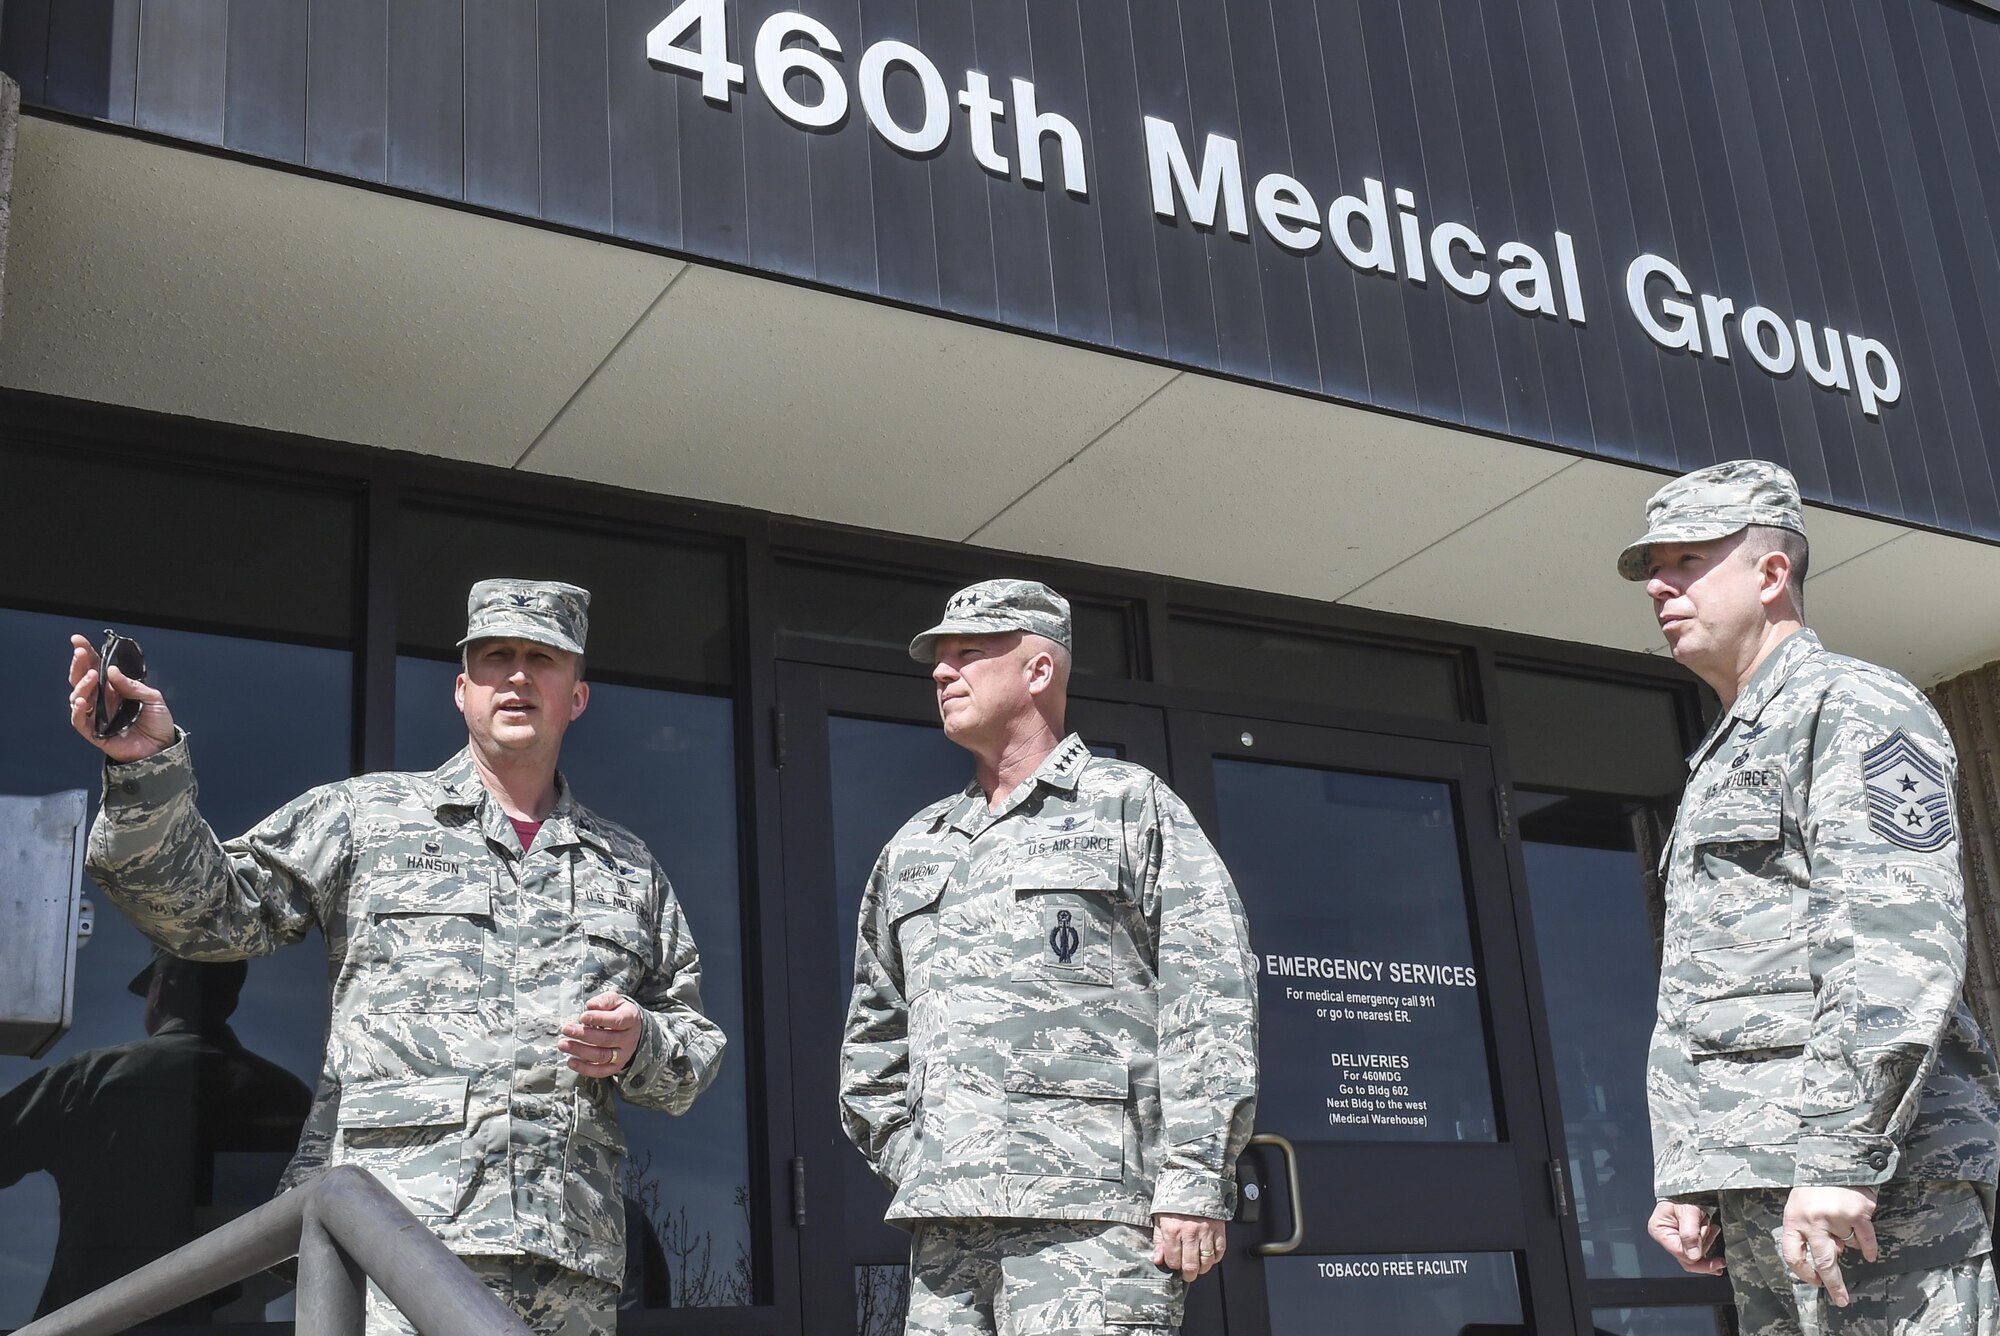 Col. Matthew Hanson, 460th Medical Group commander, left, talks about the changes coming to the 460th MDG with Gen. Jay Raymond, commander of Air Force Space Command, center, and Chief Master Sgt. Brendan Criswell, AFSPC command chief, March 17, 2017, at Buckley Air Force Base, Colo. Buckley boasts America’s Premier Space Wing, installation support to 95 multiservice and multinational units, a population of over 94,000 Team Buckley members, and a mission that is critical to the nation’s safety. (U.S. Air Force photo by Tech. Sgt. Nicholas Rau) 